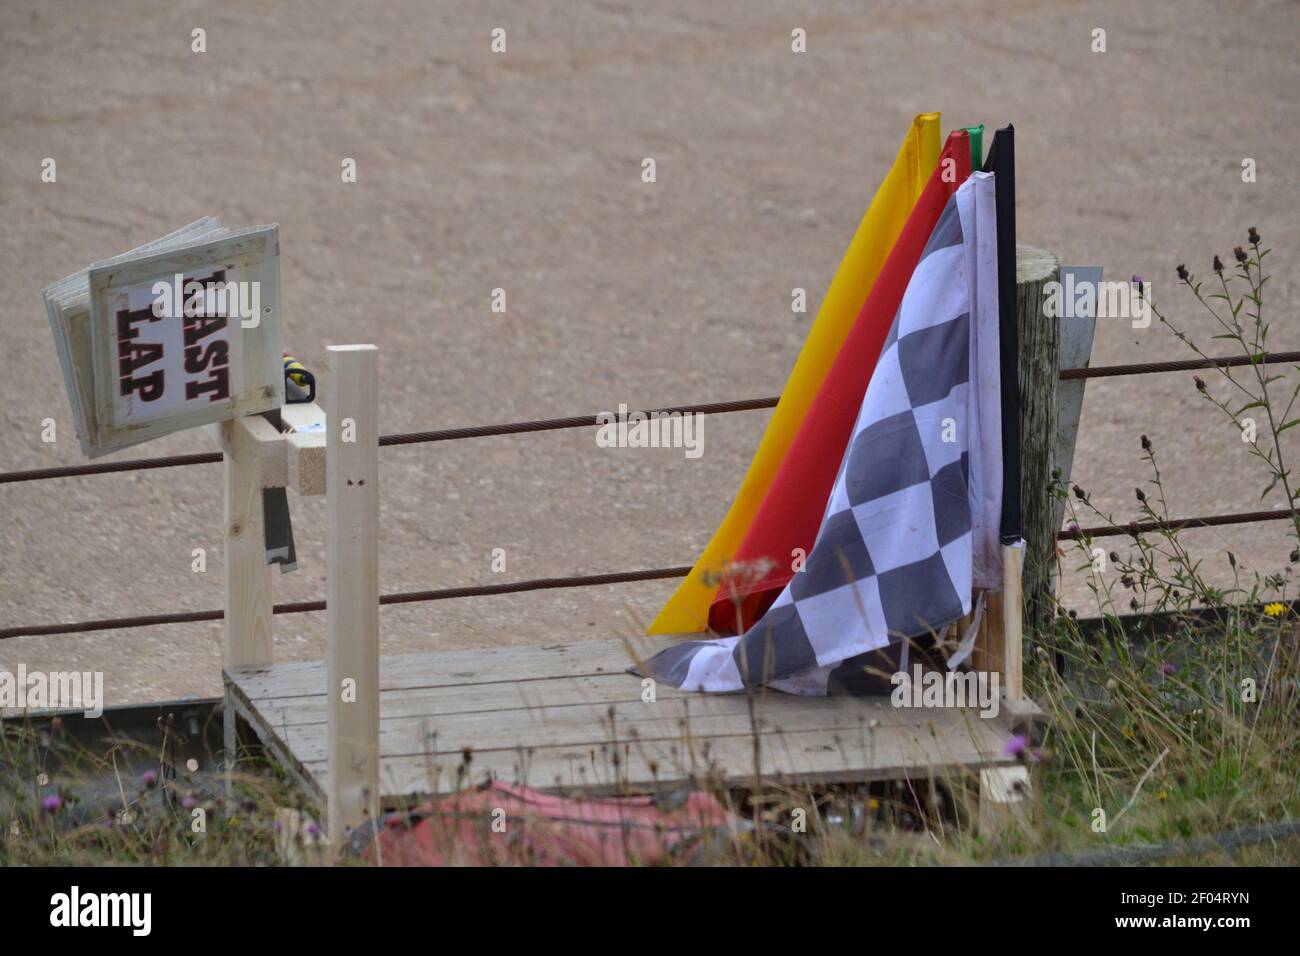 Start / Finish Marshal Post - Last Lap Board And Flags -Short Oval Grass Track Motor Racing - Hunmanby Raceway - Motorsport - Trackside -Yorkshire UK Stock Photo